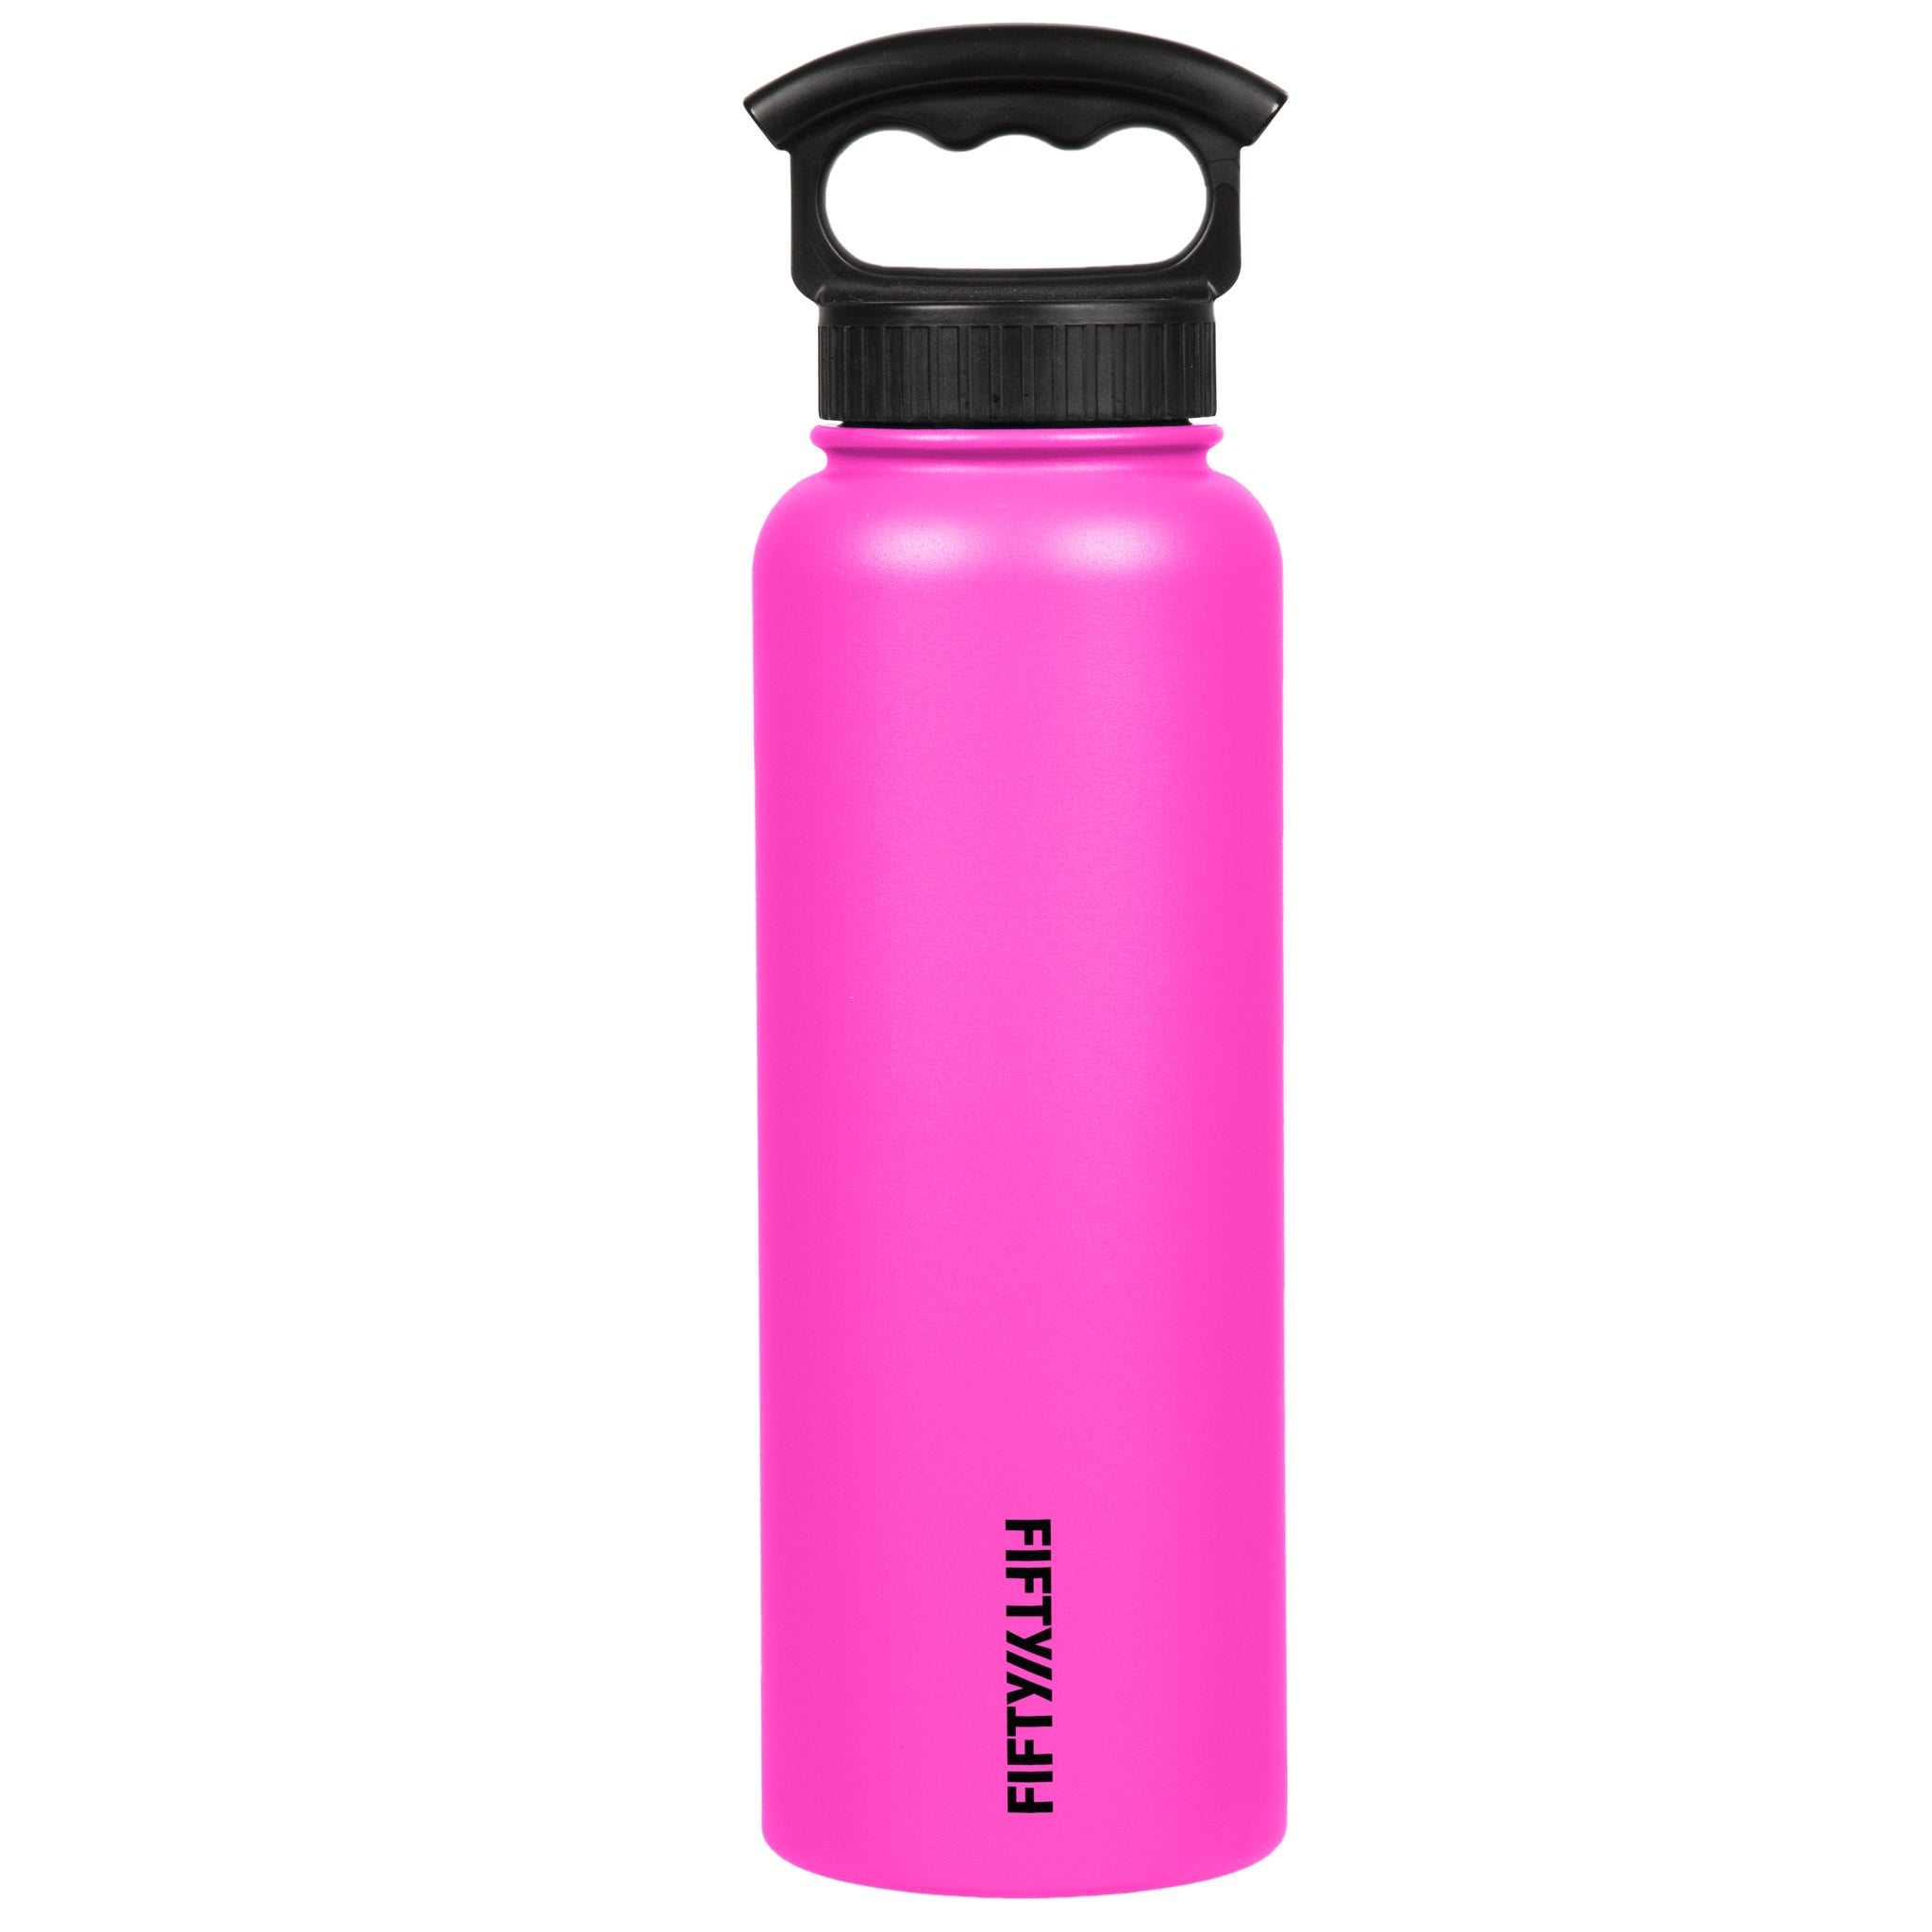 Water Bottle 40 oz Wide Mouth, Non-Insulated